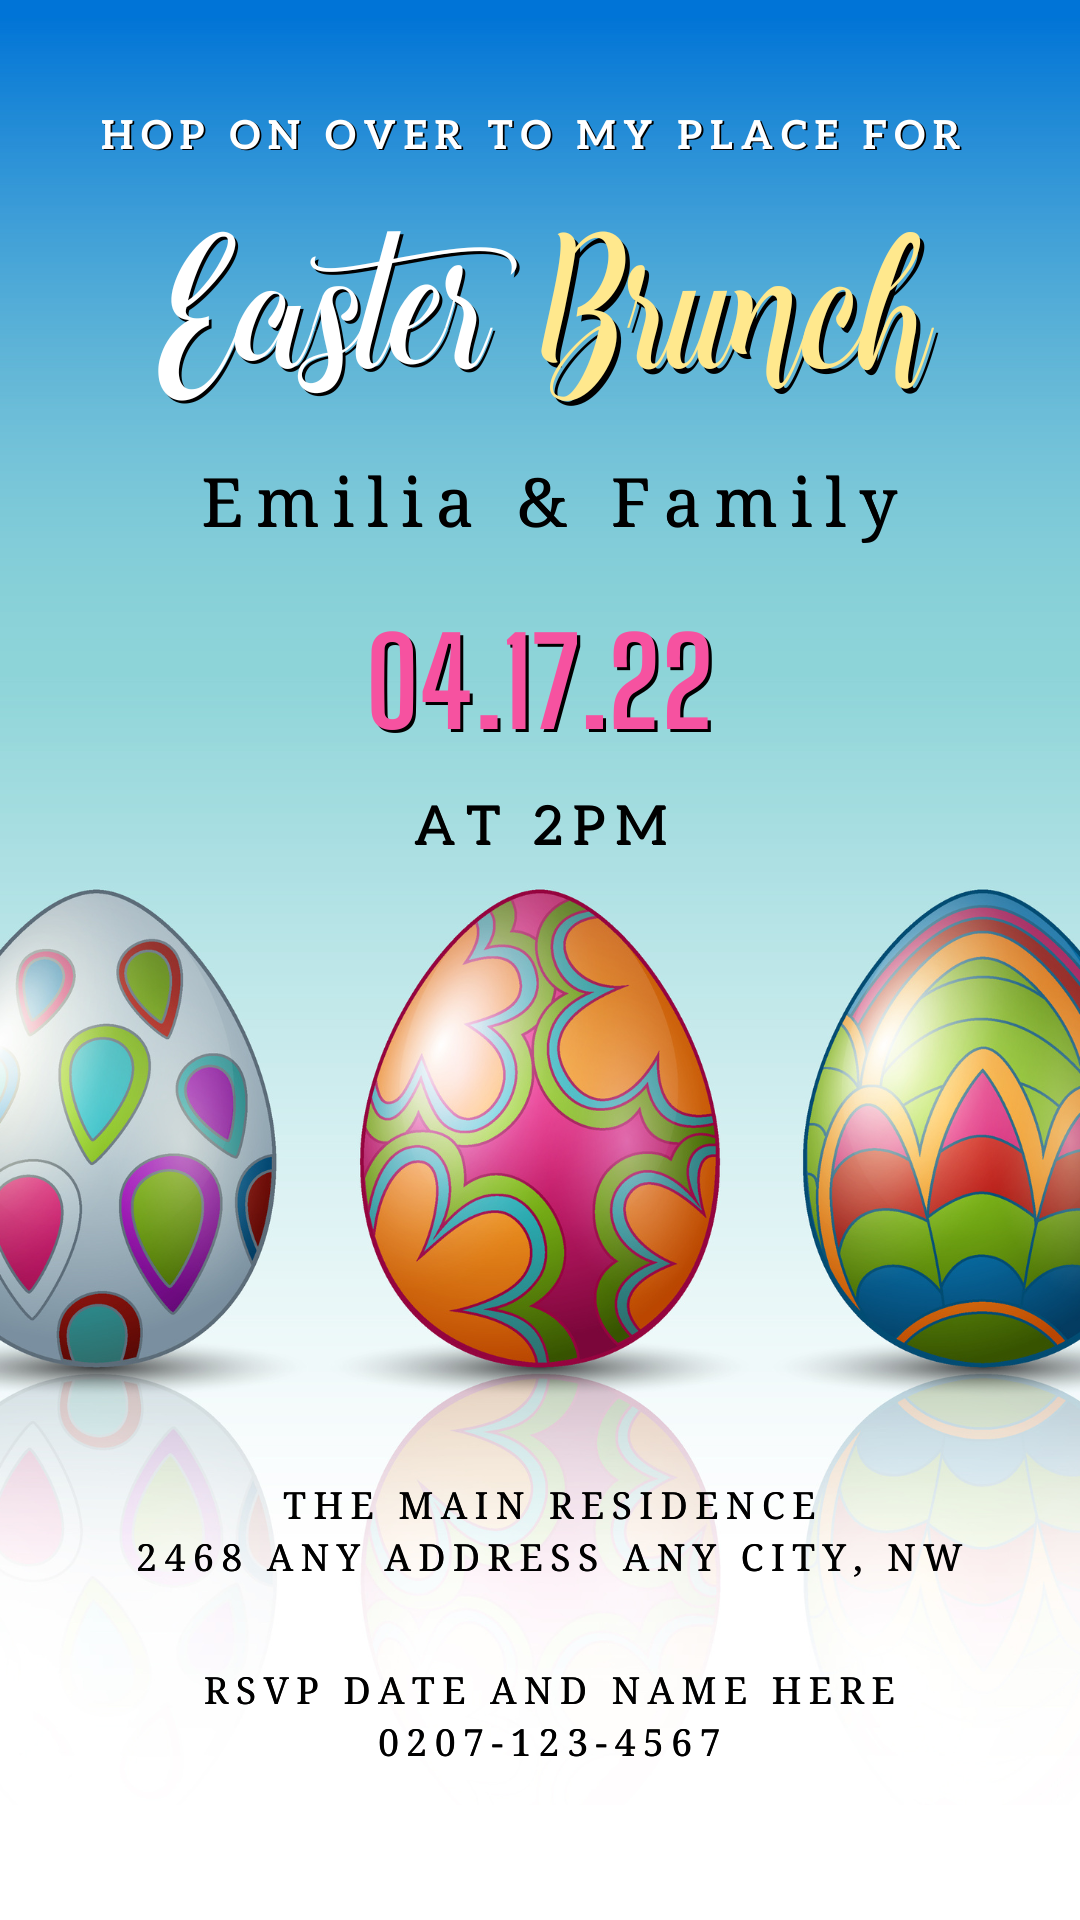 Retro Colourful Easter Eggs | Easter Brunch Party Evite template with various designed eggs, editable via Canva for personalized digital invitations.